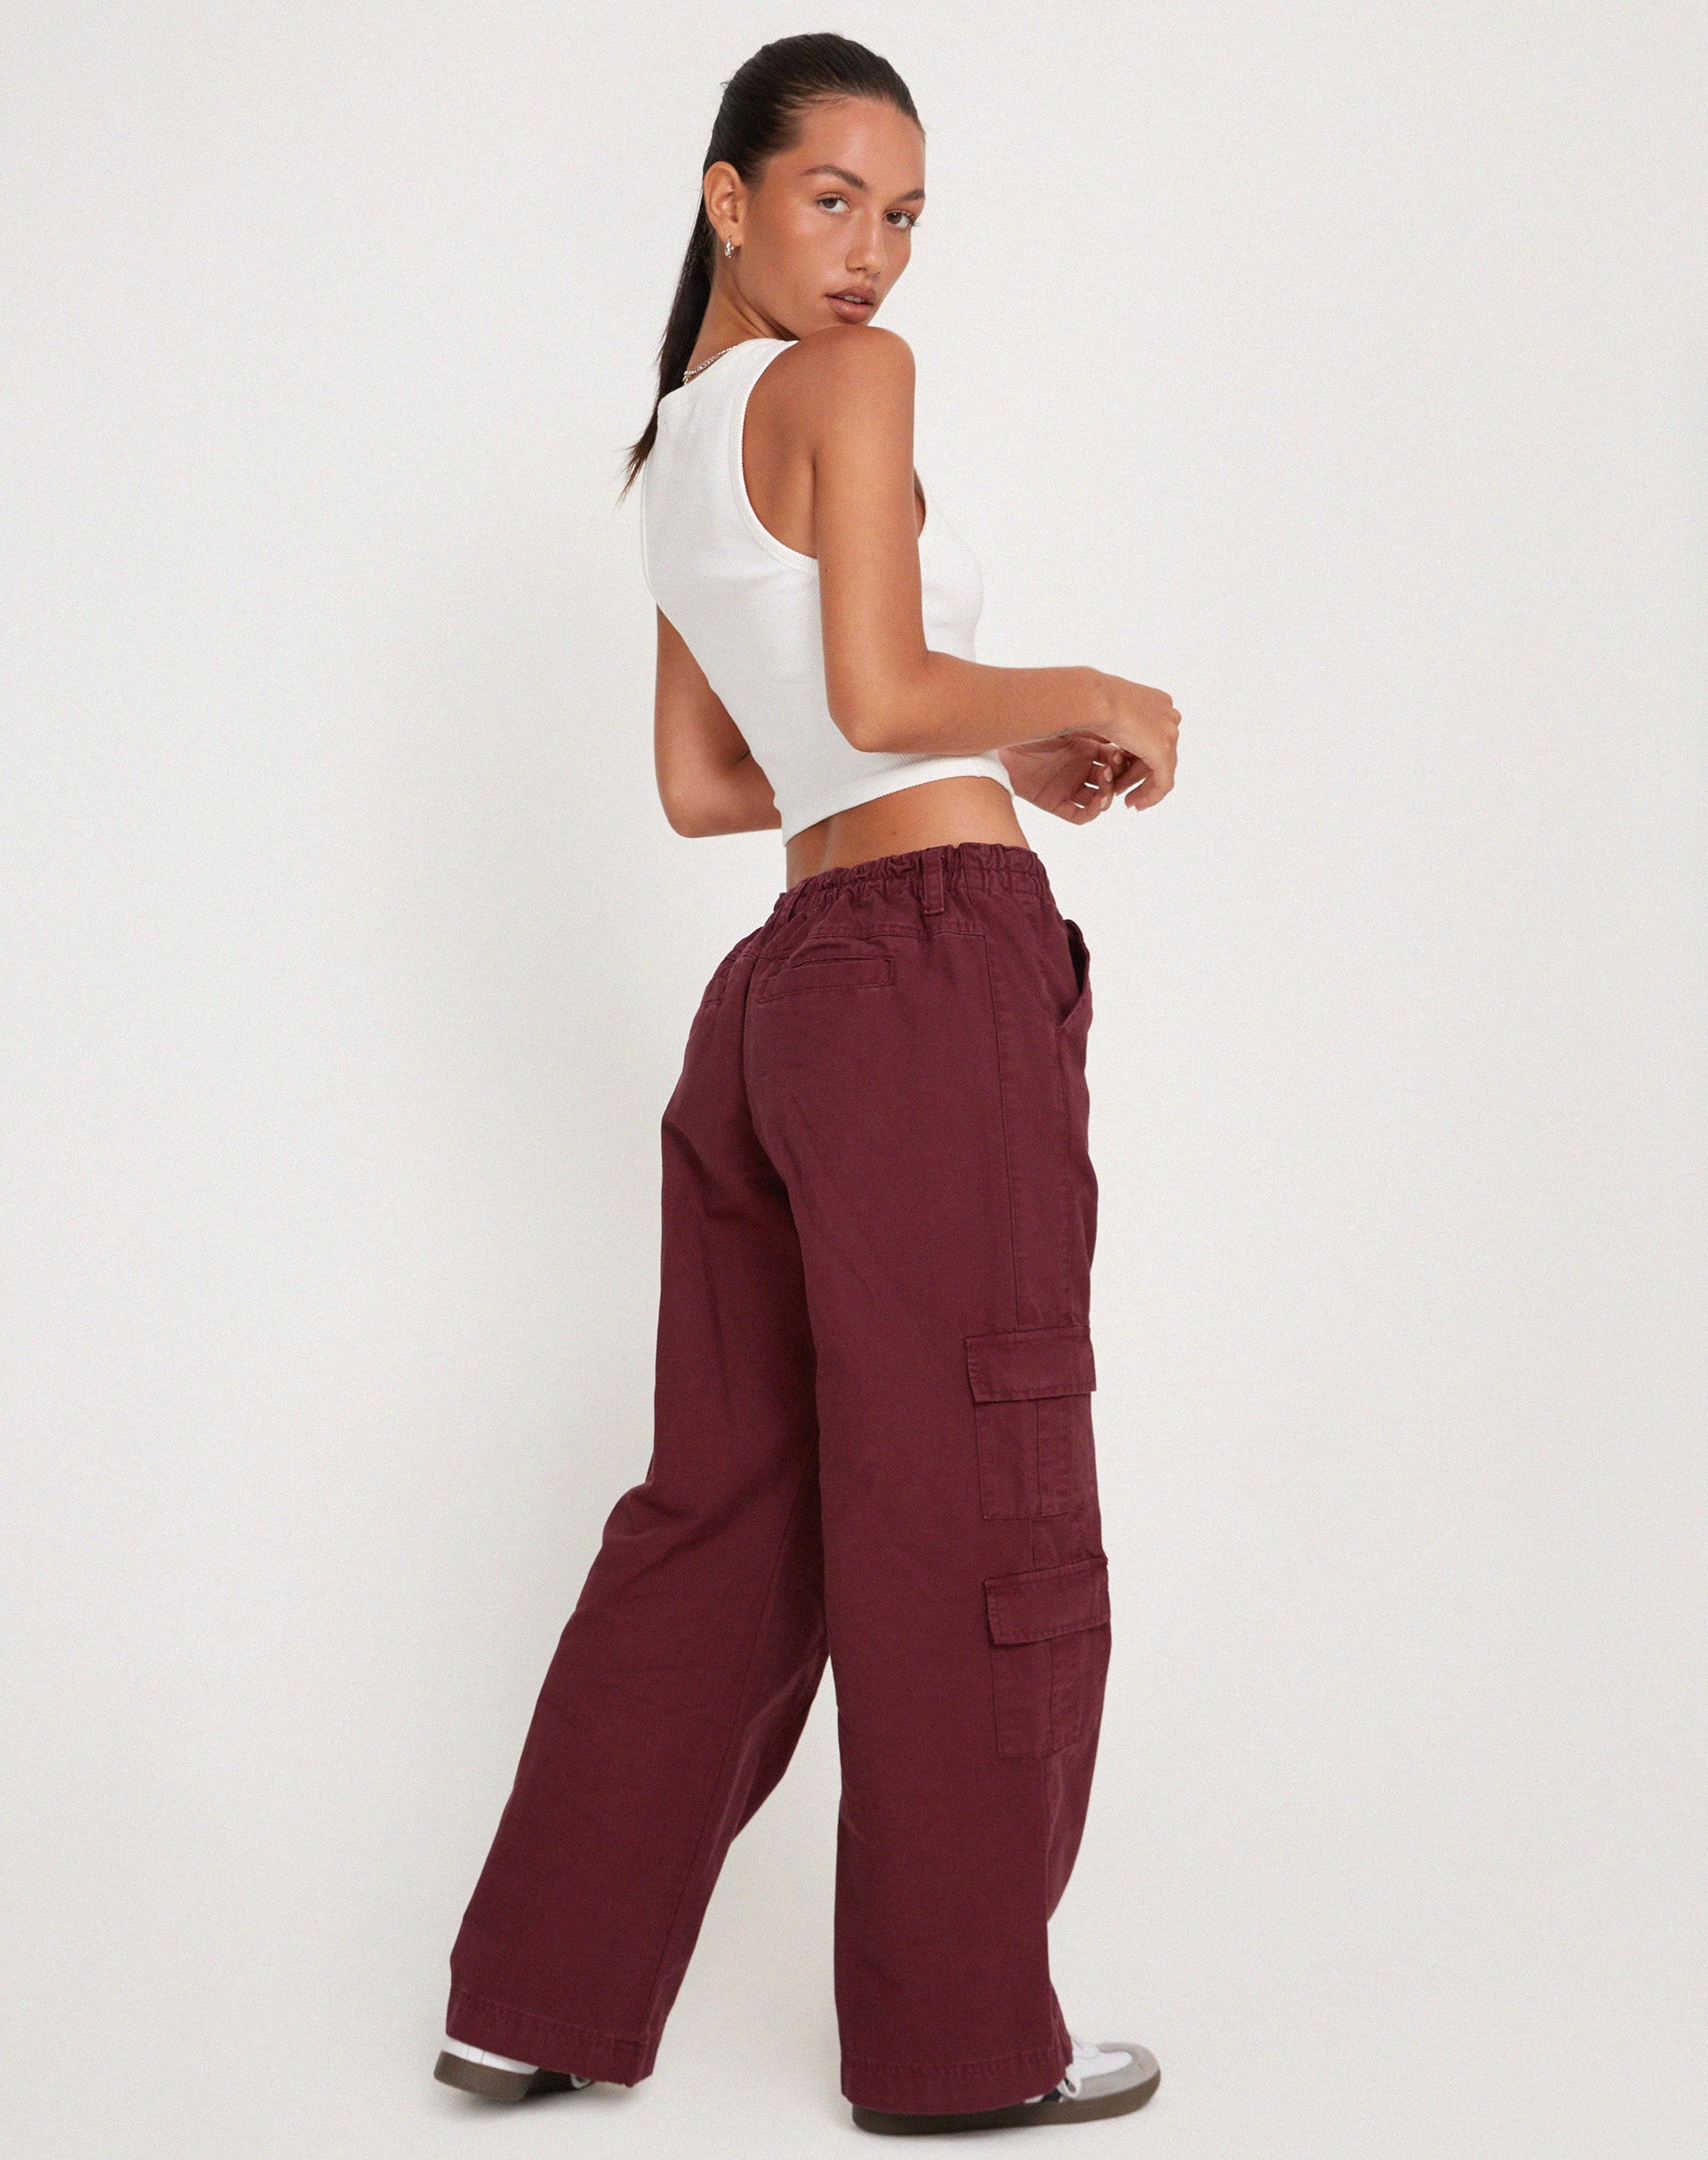 ERENCHINO Solid Men & Women Maroon Track Pants - Buy ERENCHINO Solid Men &  Women Maroon Track Pants Online at Best Prices in India | Flipkart.com